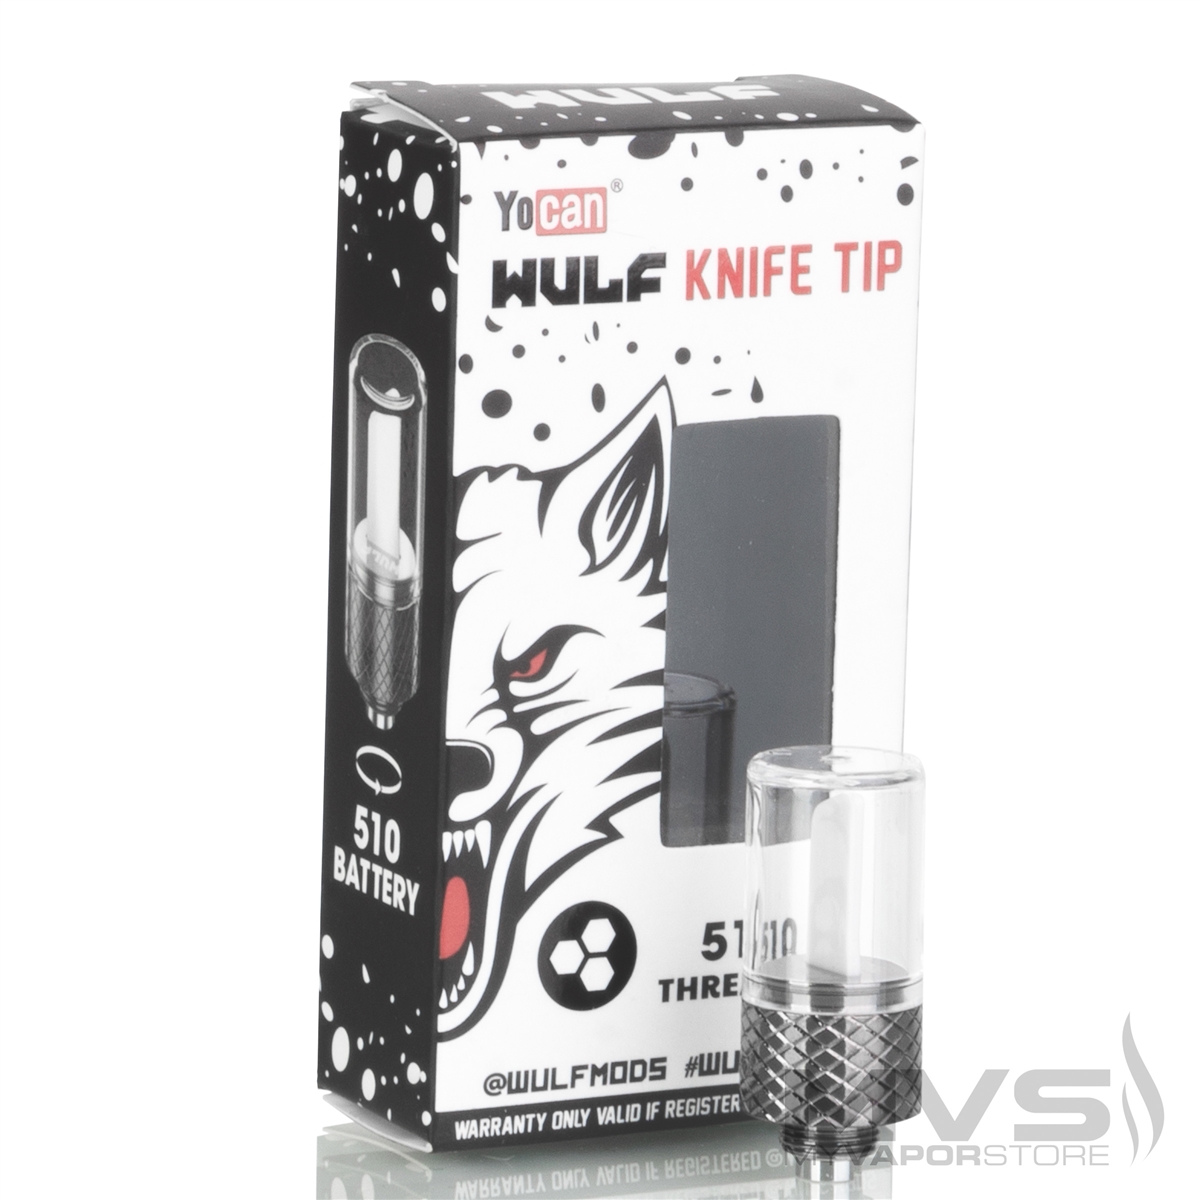 Now Available!  Wulf Knife Tip 510 by Yocan